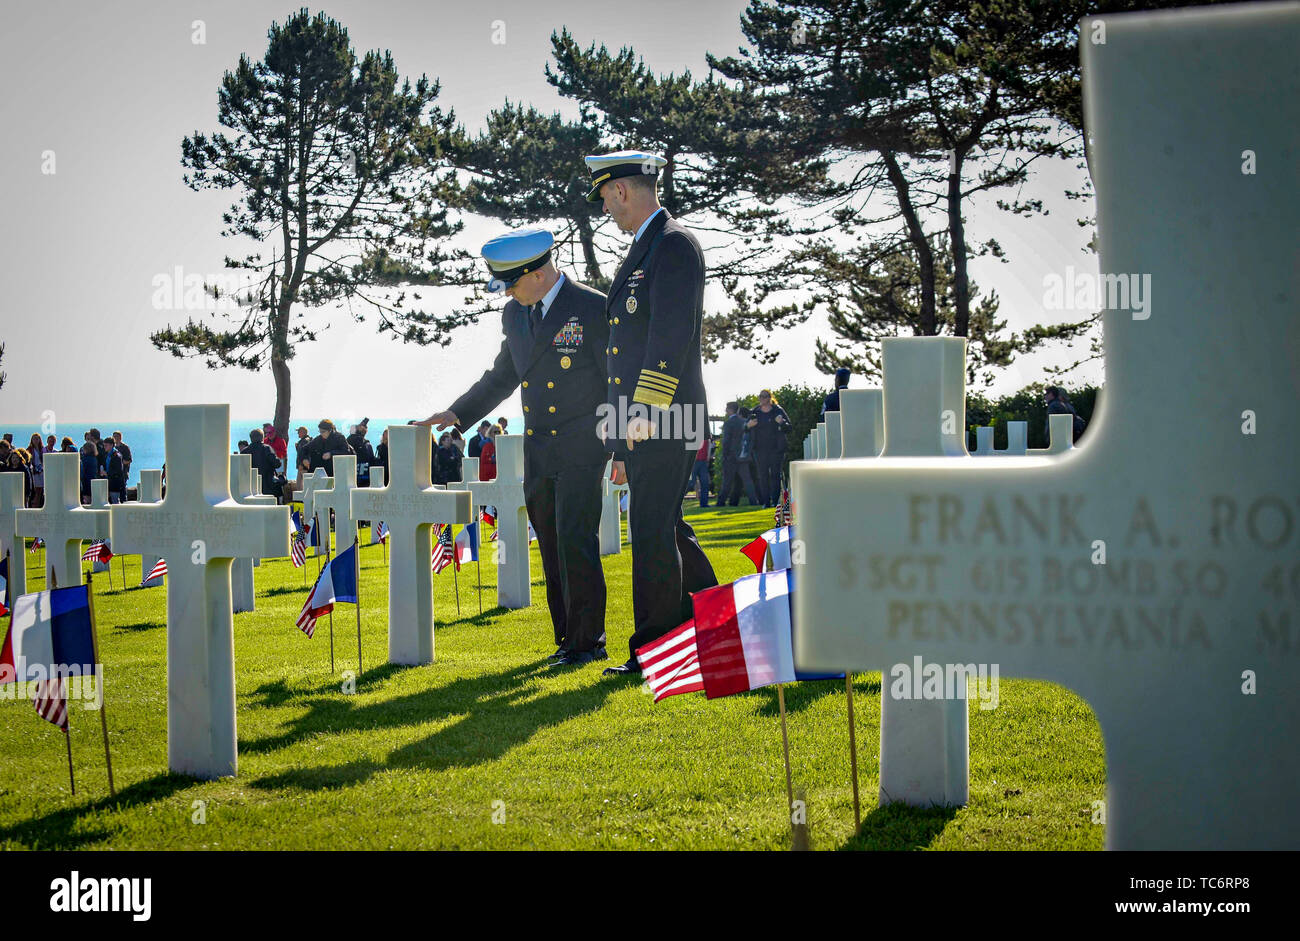 Pointe Du Hoc, France. 06th June, 2019. U.S. Nay Master Chief Petty Officer of the Navy Russell Smith, left, and Chief of Naval Operations Adm. John Richardson visit the Normandy American Cemetery on the anniversary of the D-Day invasion June 6, 2019 in Pointe du Hoc, Normandy, France. Thousands have converged on Normandy to commemorate the 75th anniversary of Operation Overlord, the WWII Allied invasion commonly known as D-Day. Credit: Planetpix/Alamy Live News Stock Photo